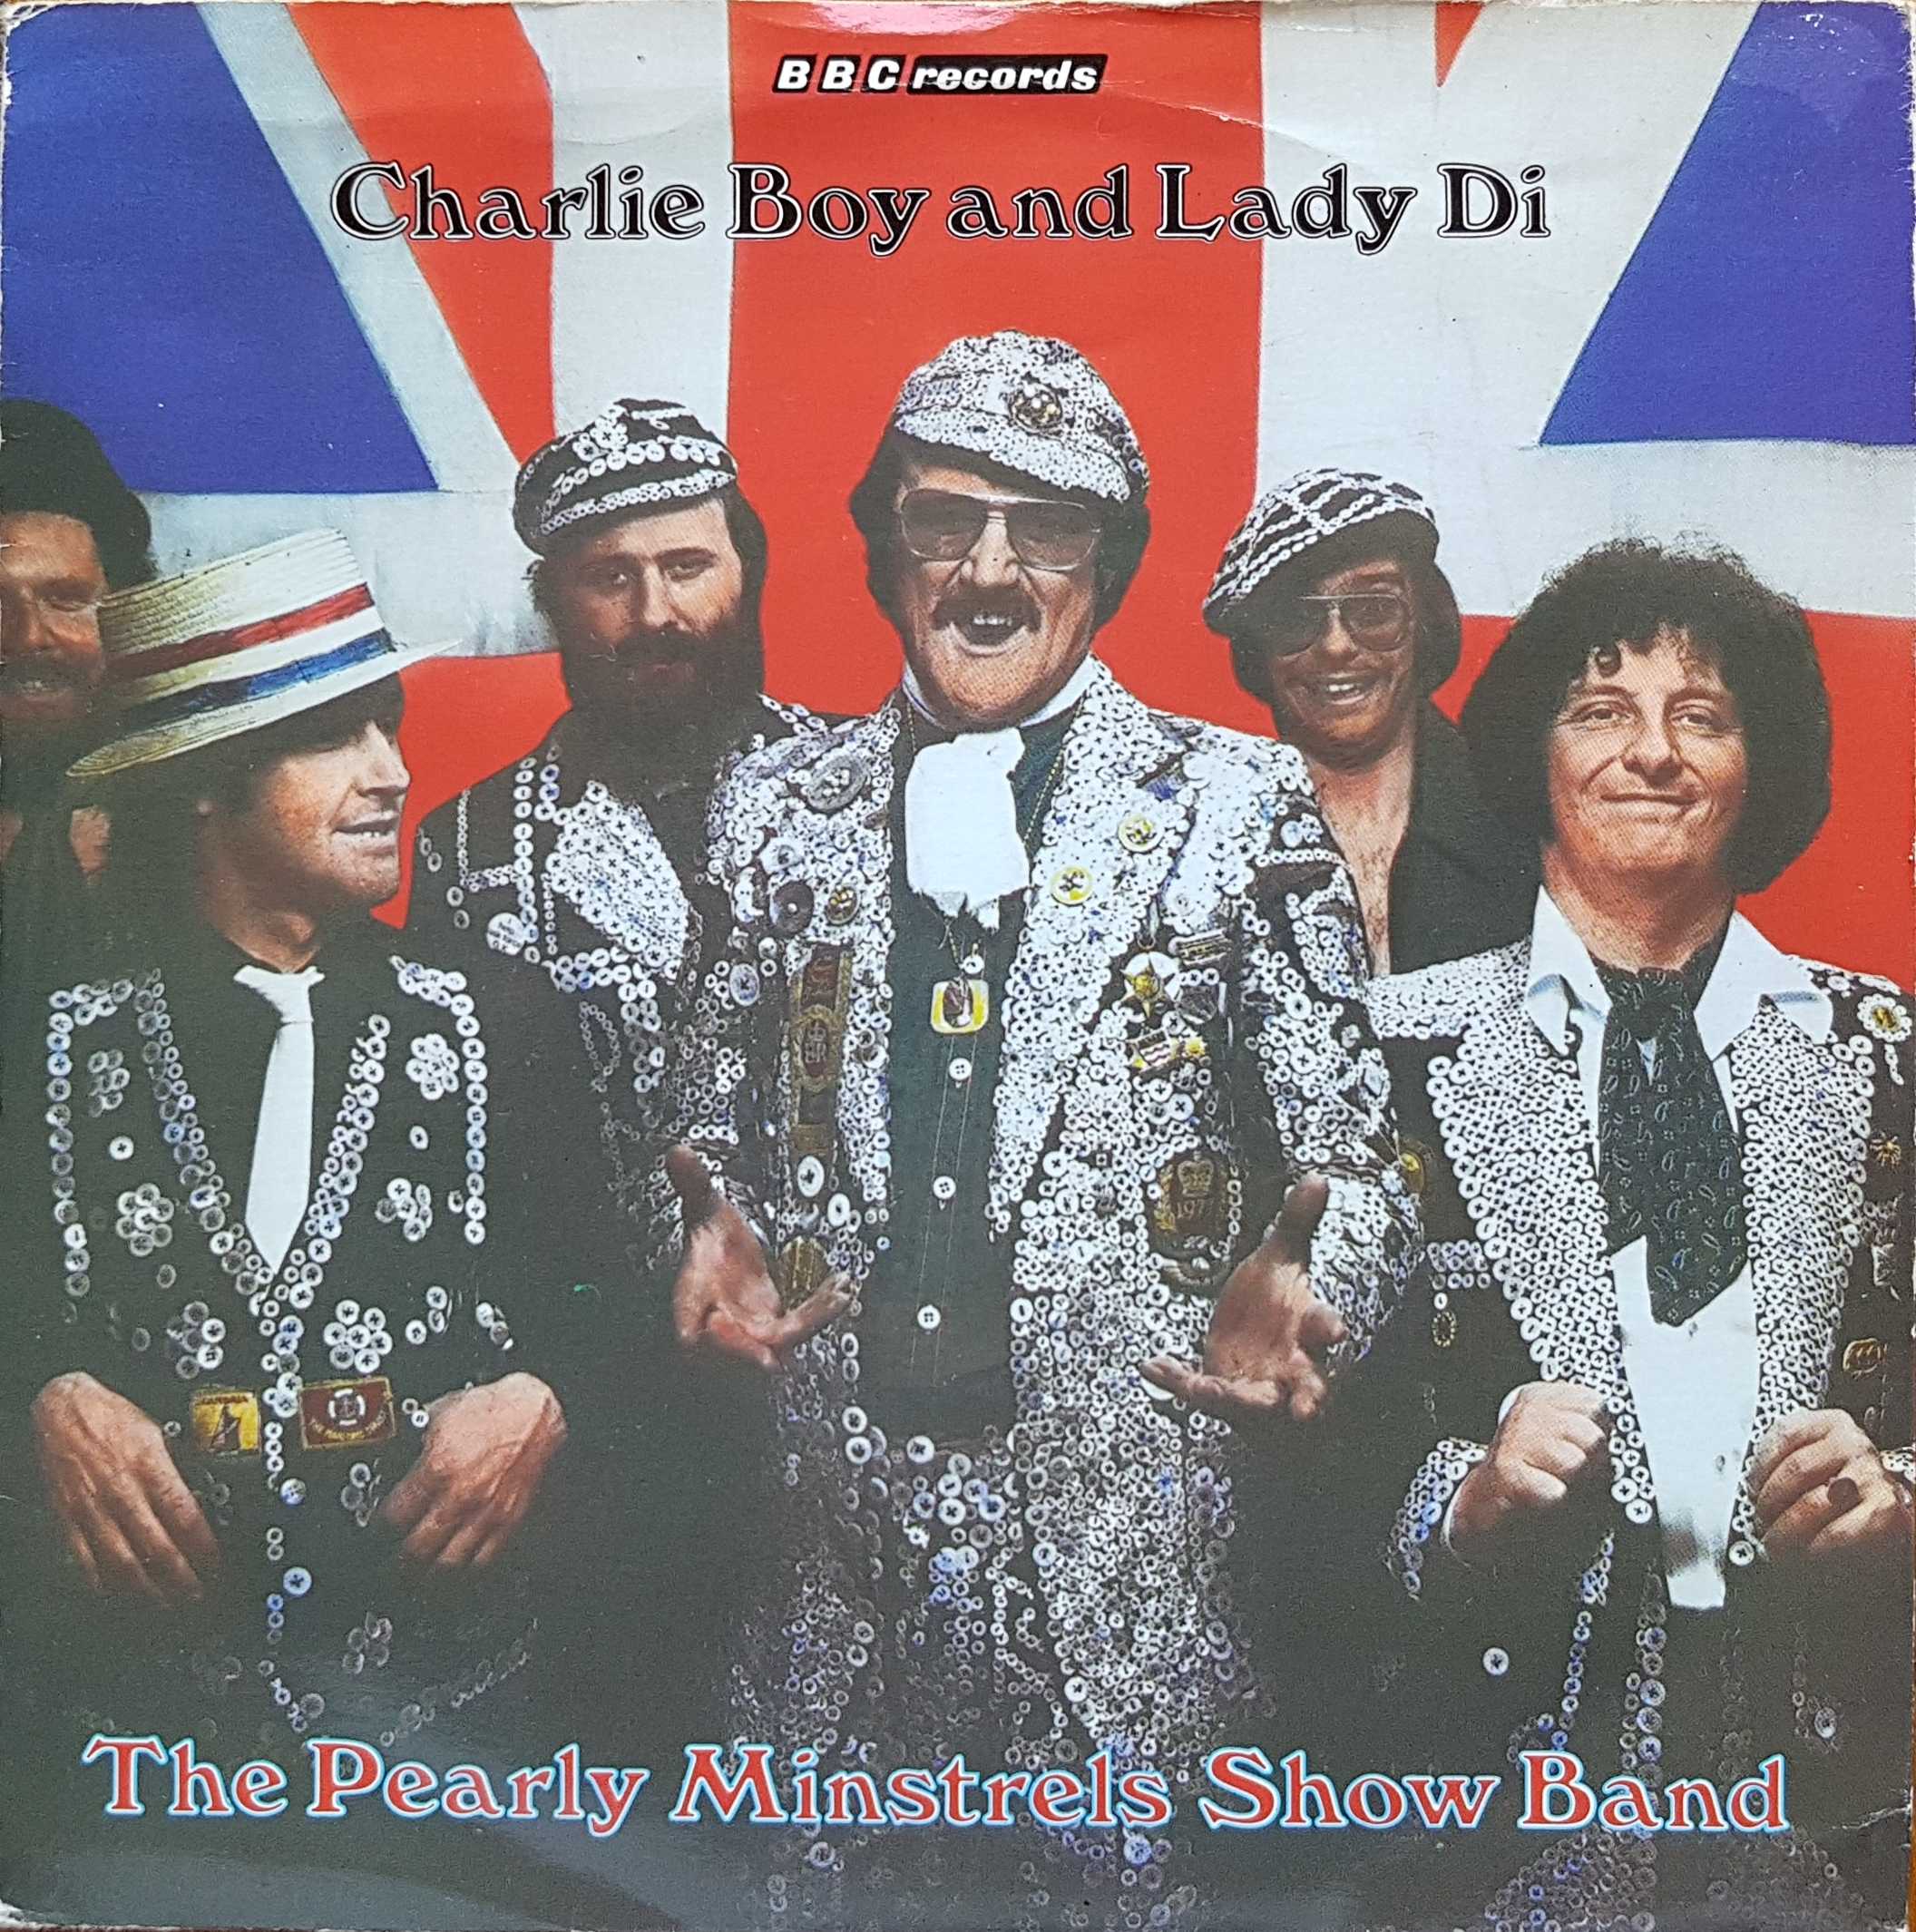 Picture of RESL 94 Charlie Boy and Lady Di by artist Ricky Conway from the BBC singles - Records and Tapes library